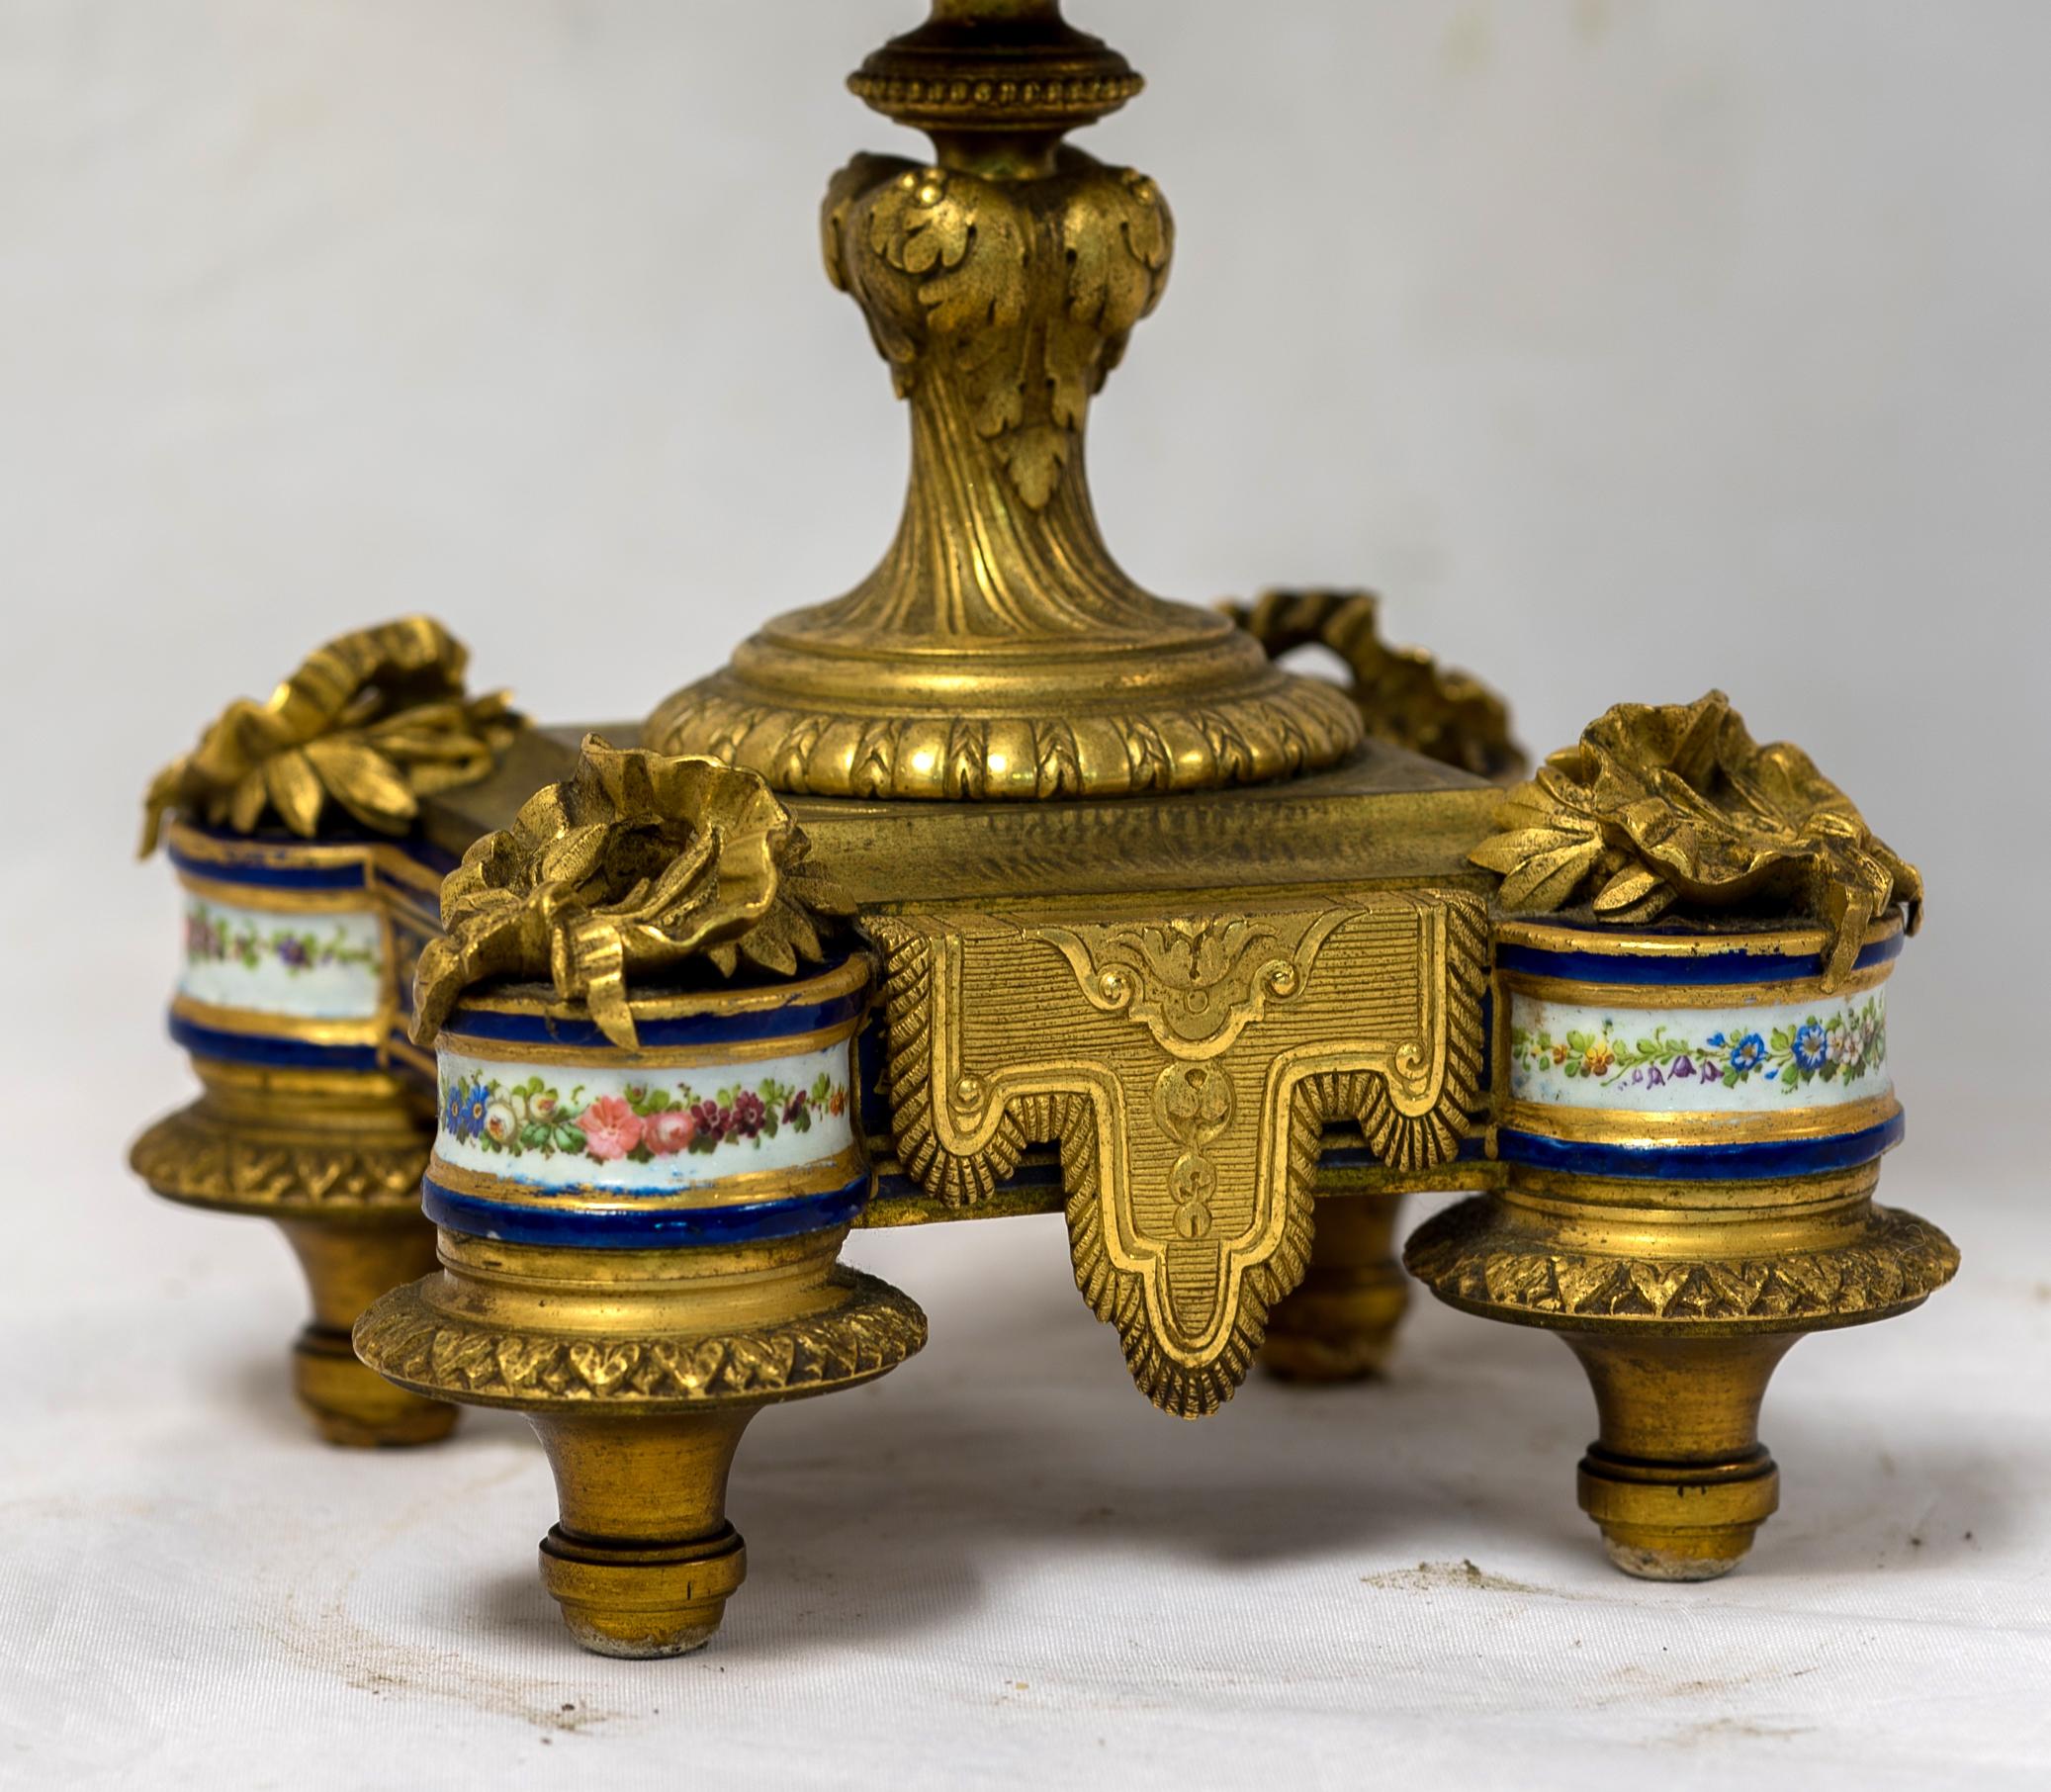 Rare Pair of Four-Branch Gilt Bronze & Jeweled Sèvres Style Porcelain Candelabra For Sale 5